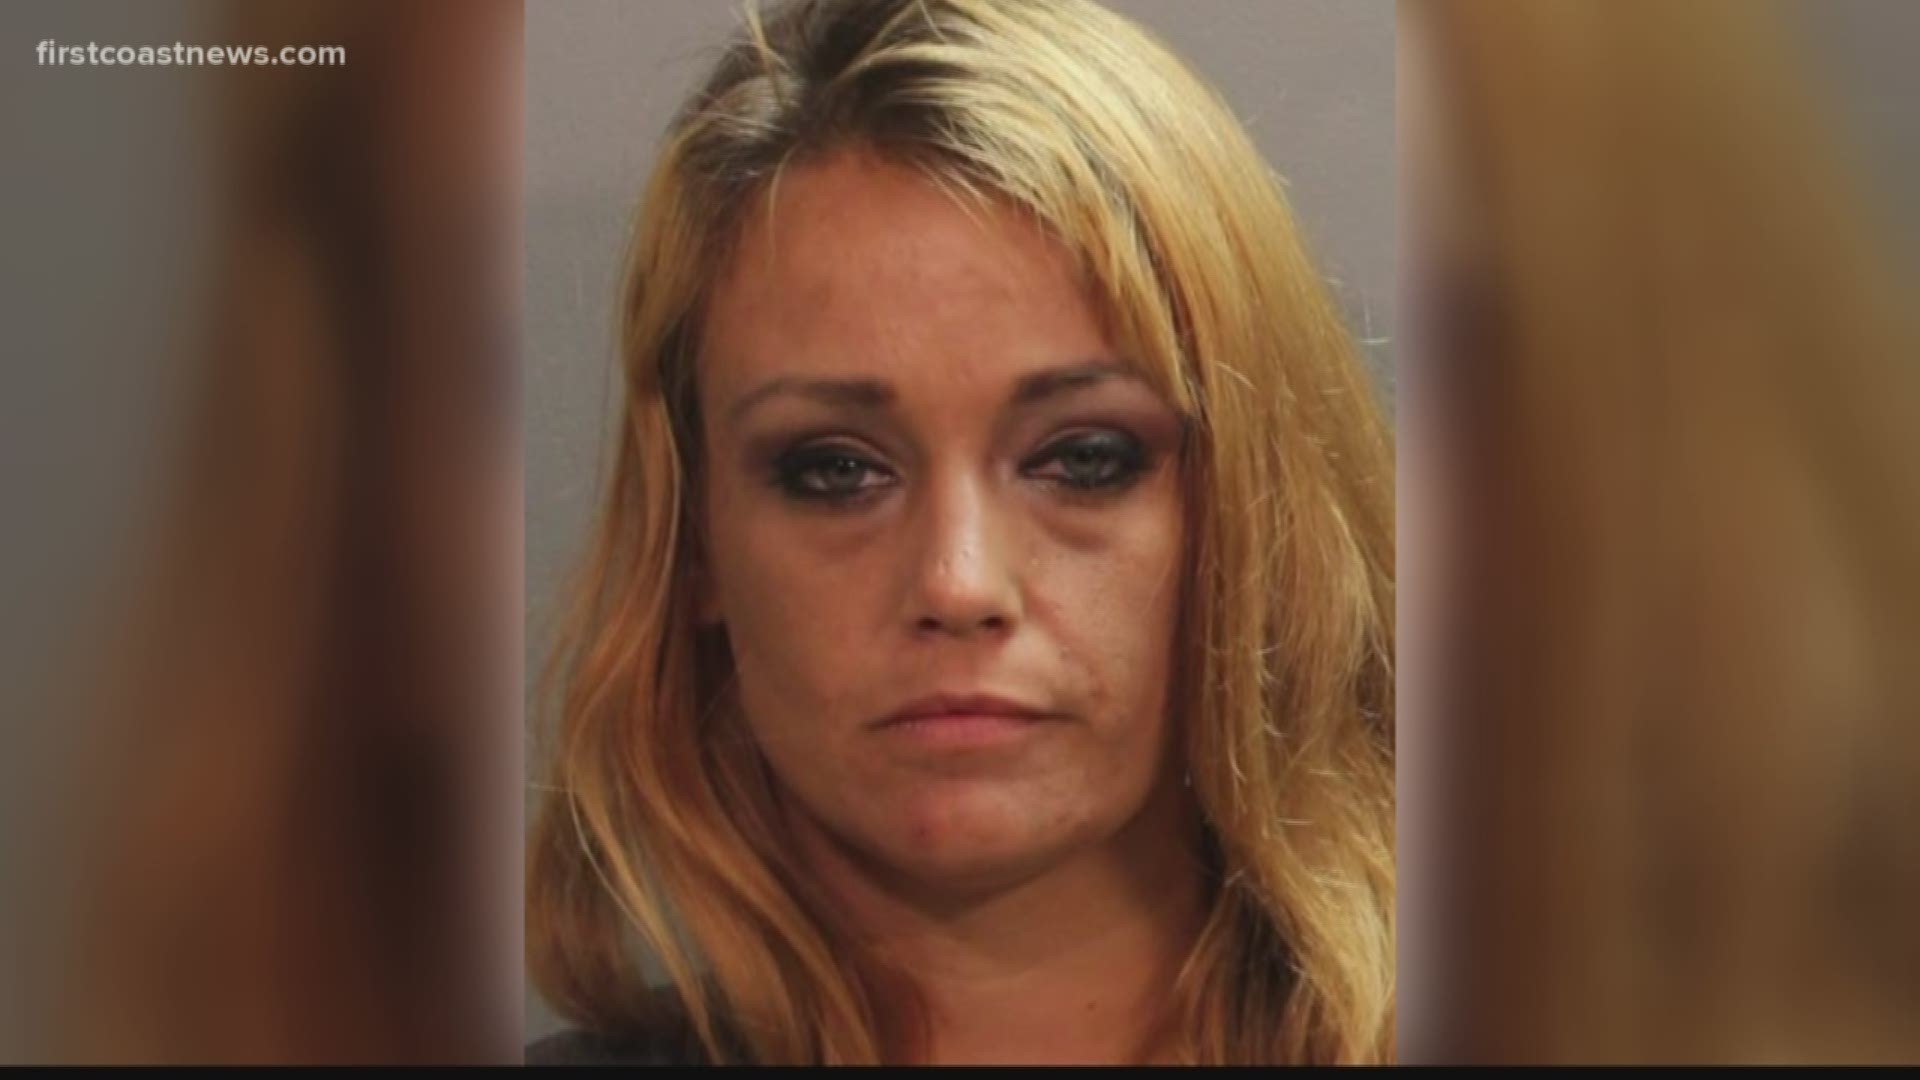 The Jacksonville Sheriff's Office is on the lookout for an escaped prisoner who fled the scene as officers tried to arrest her in Northside.